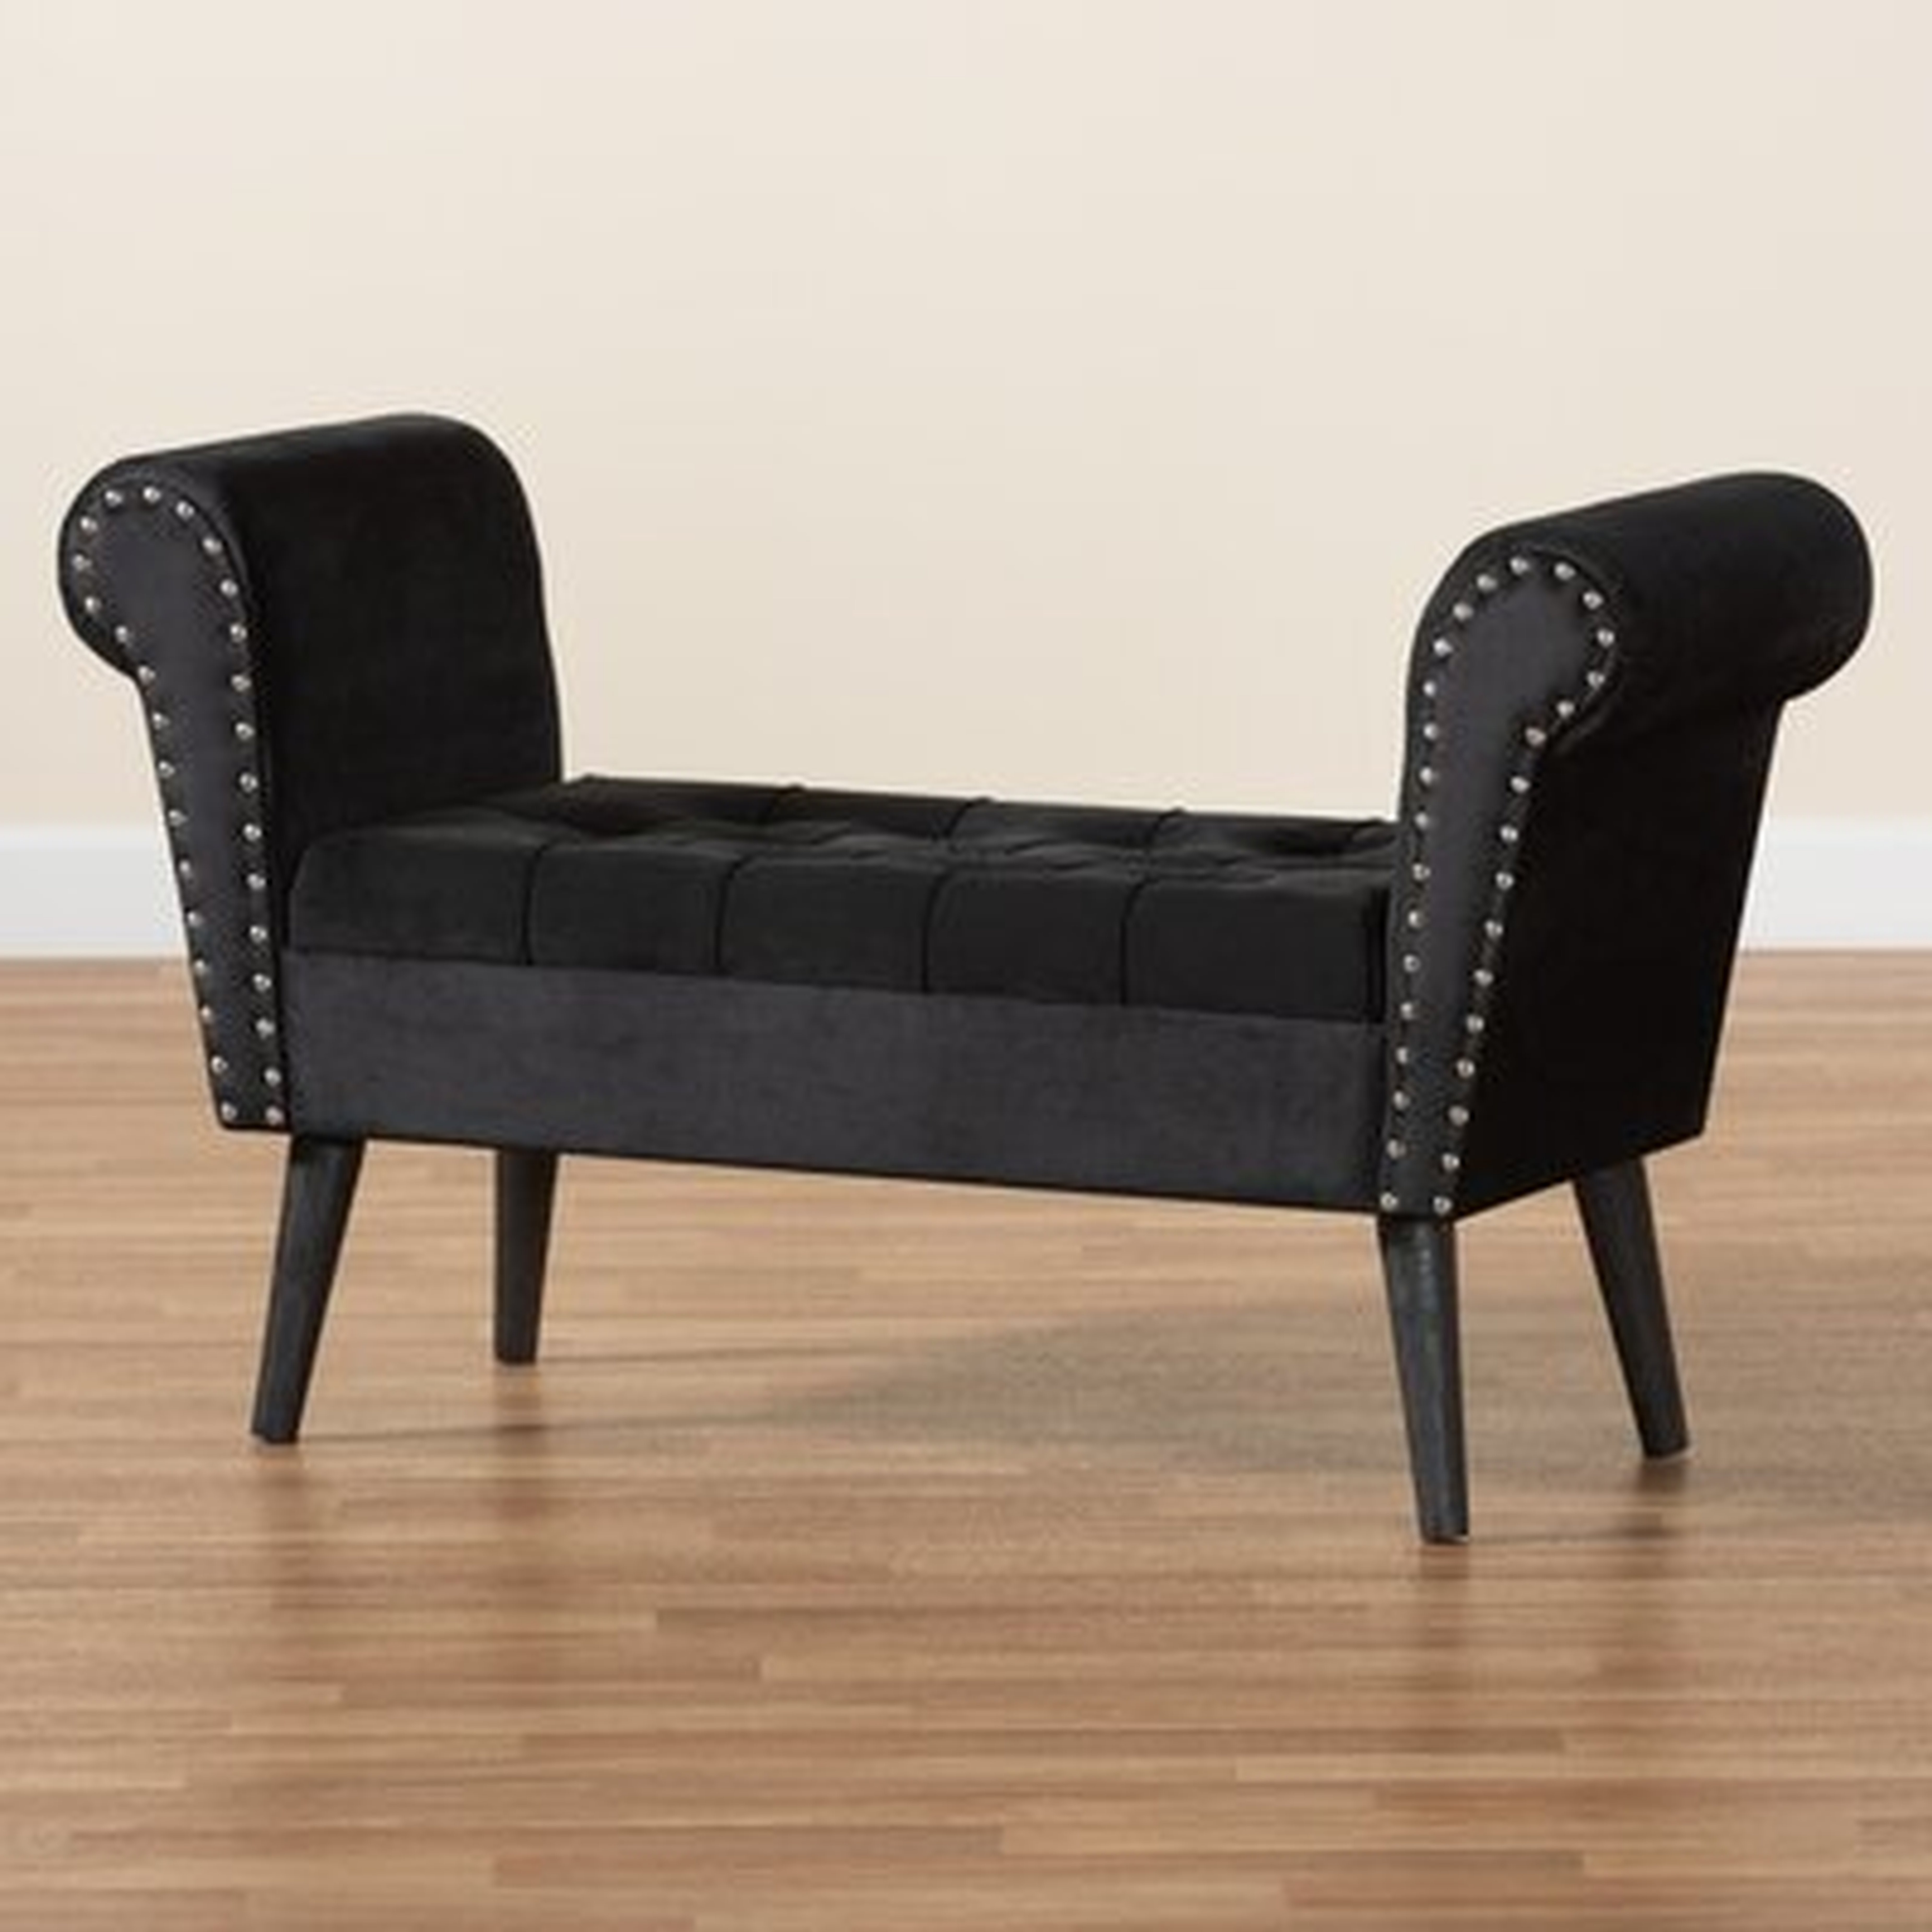 Agis Contemporary Glam And Luxe Black Velvet Fabric Upholstered Black Finished Wood Bench - Wayfair